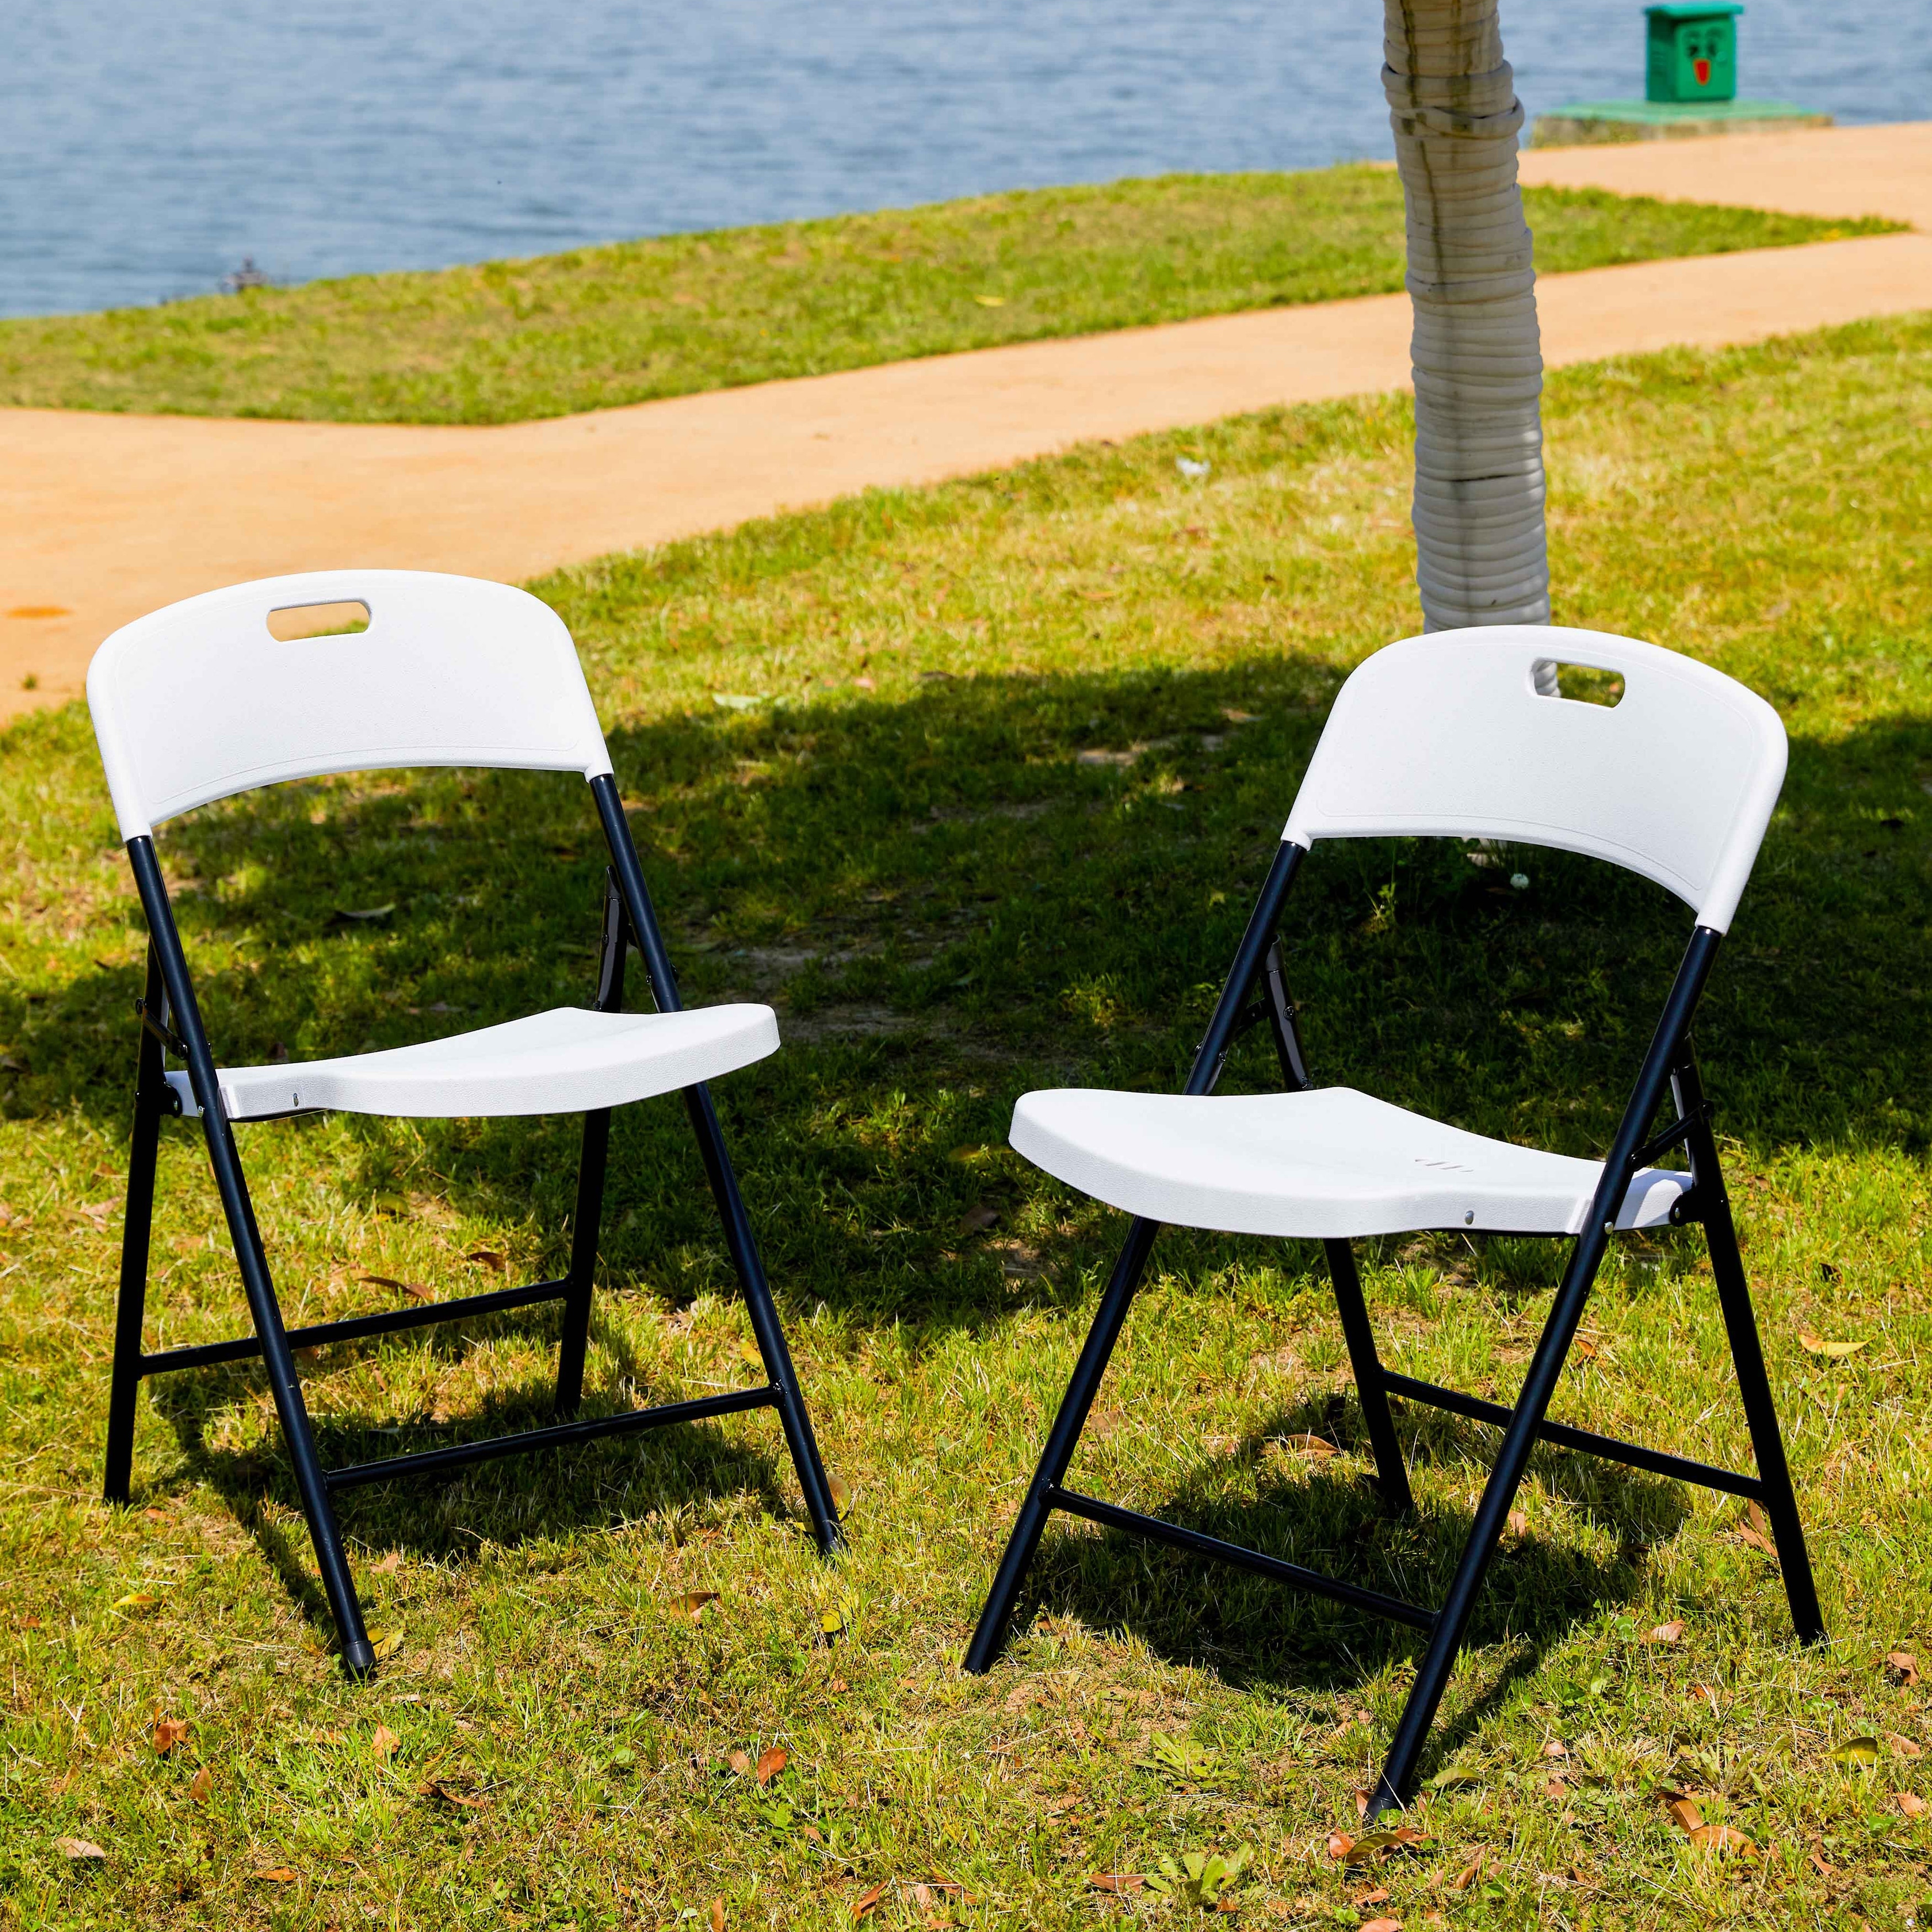 4 Pack Portable Plastic Folding Chairs  Sturdy Design  Indoor/outdoor Events  Perfect For Camping/picnic/tailgating/party